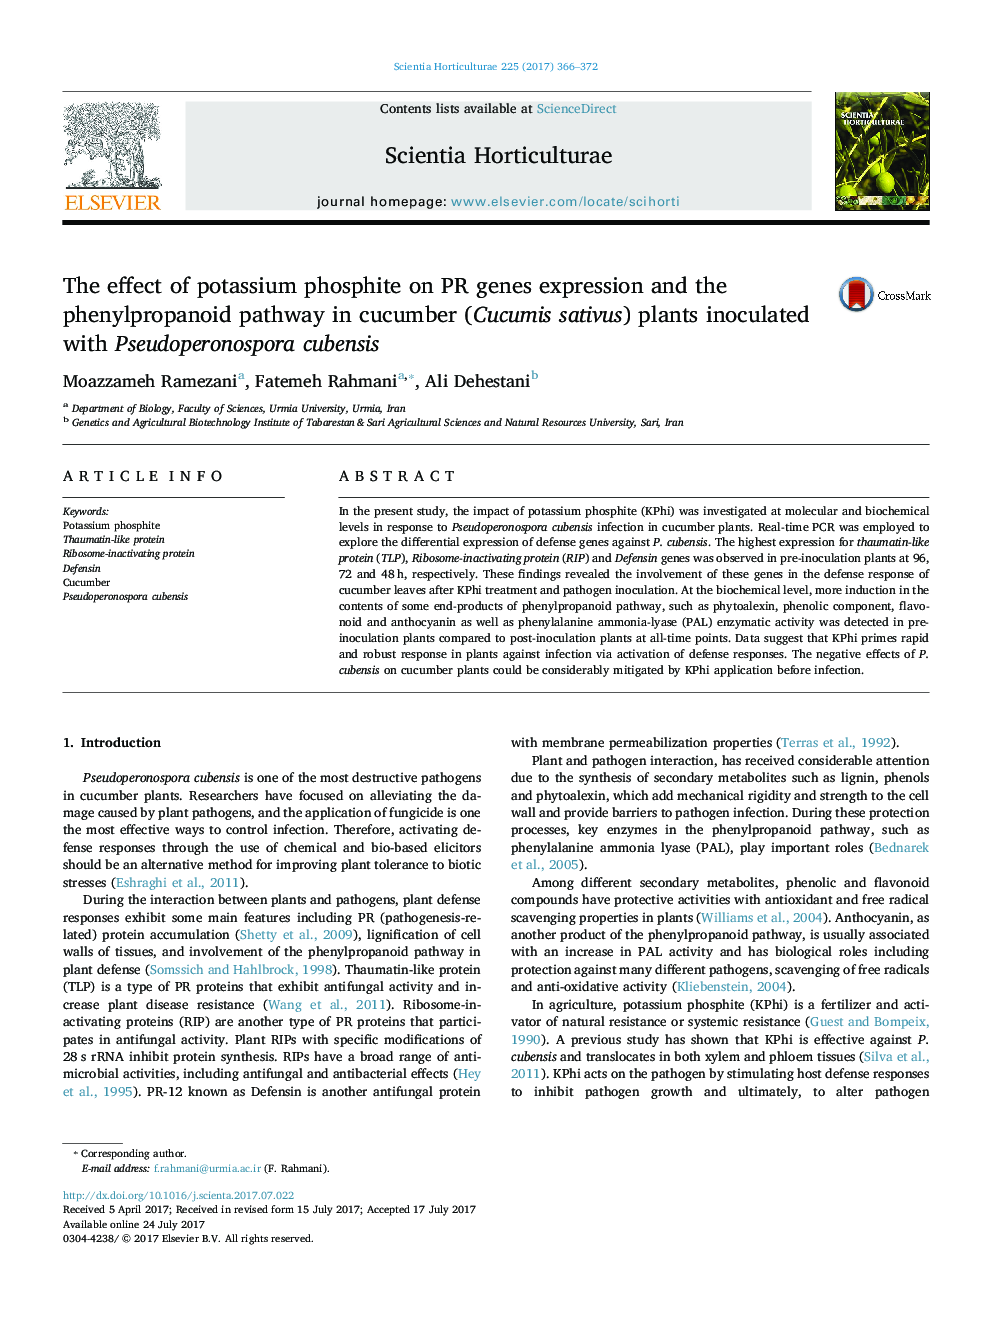 The effect of potassium phosphite on PR genes expression and the phenylpropanoid pathway in cucumber (Cucumis sativus) plants inoculated with Pseudoperonospora cubensis